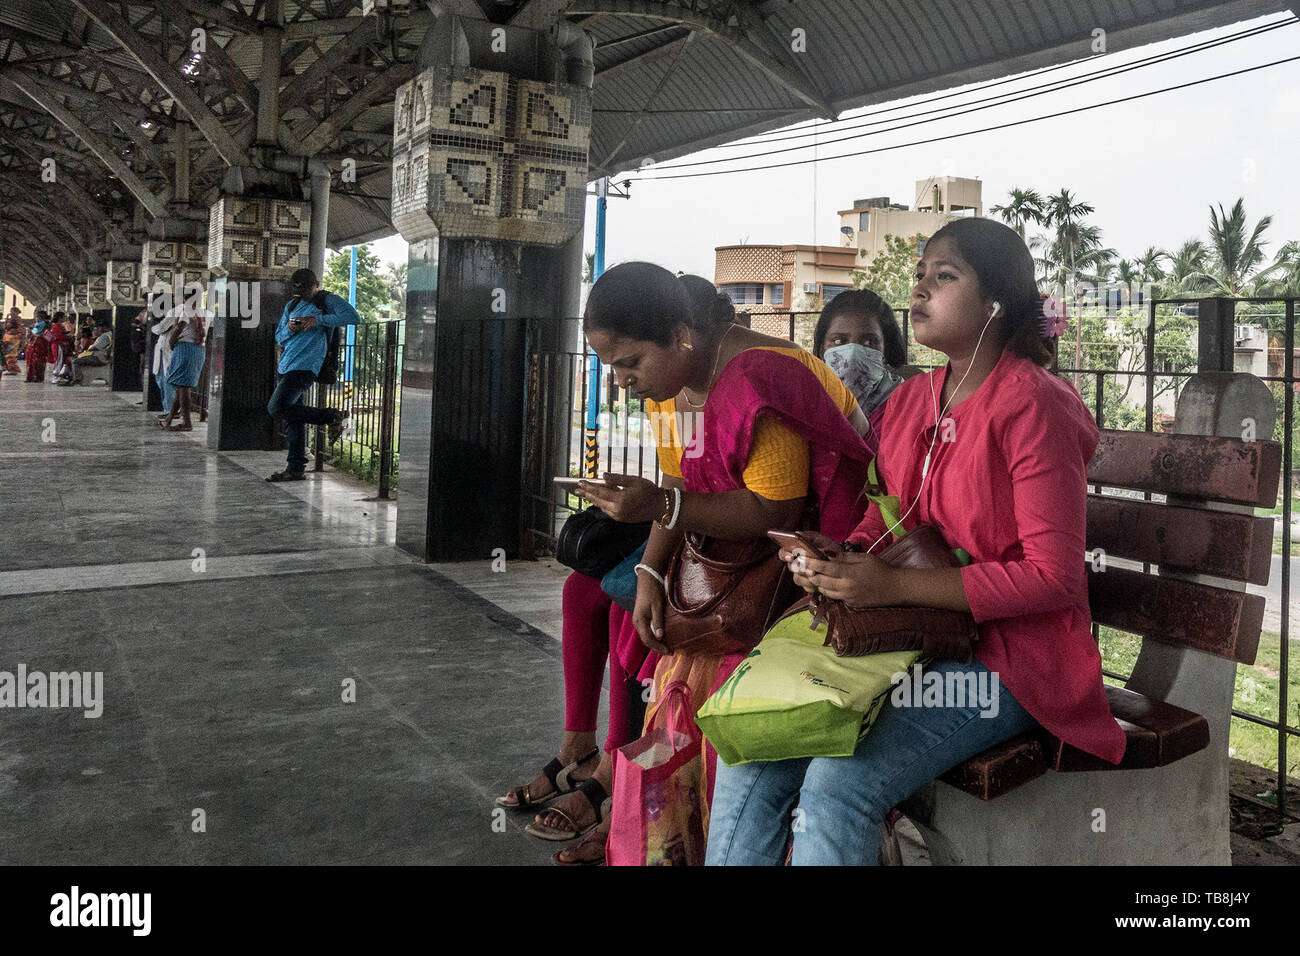 Kolkata. 30th May, 2019. People check mobile phones in Kolkata, India on May 30, 2019. Over years, fake news have emerged as a big challenge in India both for the government and the civil society, even as it led to violence and tension in the society, at times even killings. TO GO WITH Spotlight: Fake News in social media big challenge in India Credit: Tumpa Mondal/Xinhua/Alamy Live News Stock Photo